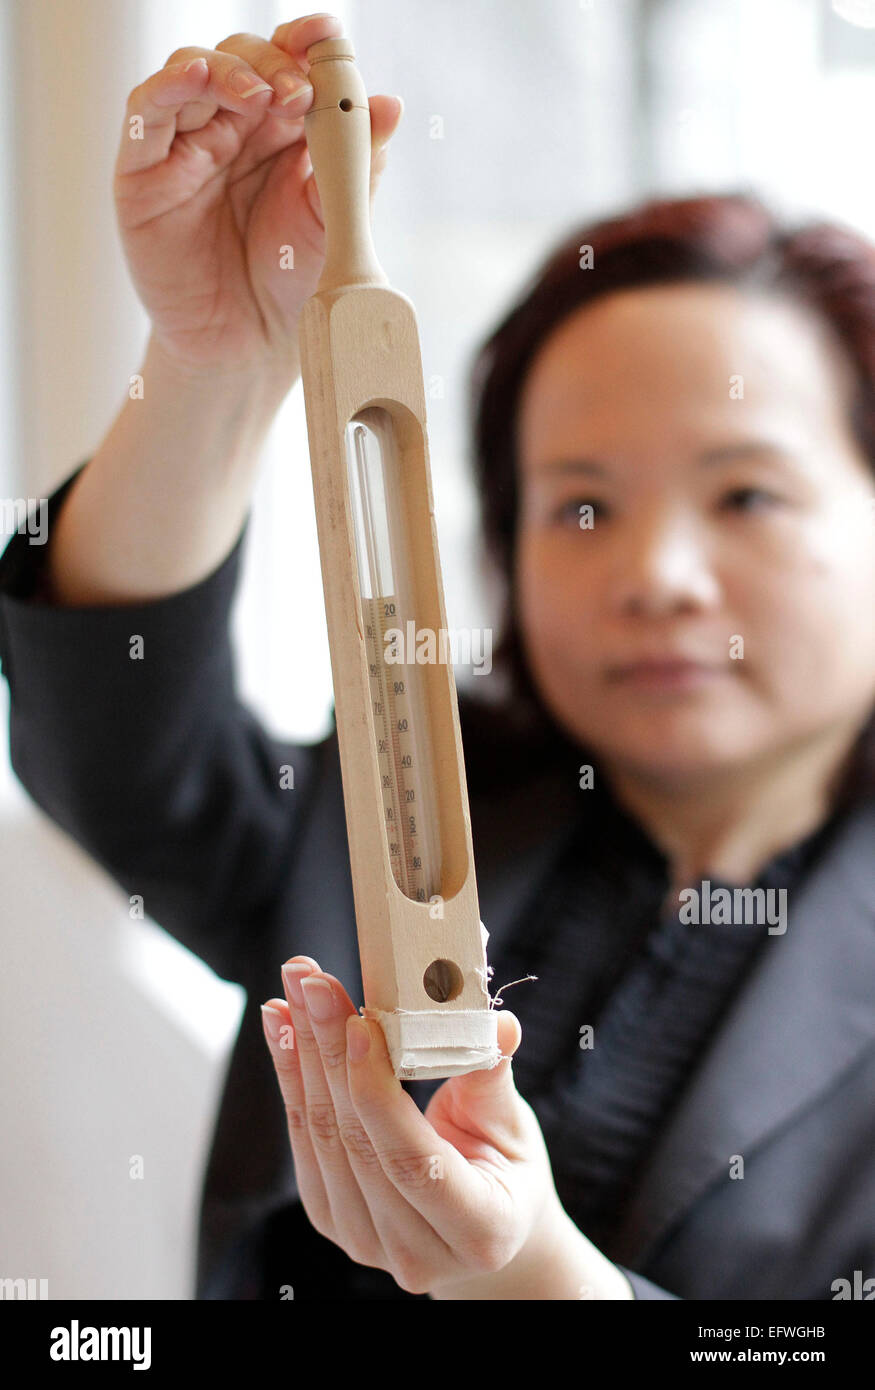 (150211) -- VANCOUVER, Feb. 11, 2015 (Xinhua) -- A nursing school alumni displays a thermometer used in early 19th century during the nursing school celebration event at University of British Columbia in Richmond, Canada, Feb. 10, 2015. In honour of the Canadian nursing pioneer Ethel Johns (1879-1968) named as National Historic Person of Canada, the School of Nursing in University of British Columbia held an event displaying the former nursing uniforms and historic nursing tools during the World War I to commemorate her contribution. Ethel Johns established the first university degree nursing Stock Photo